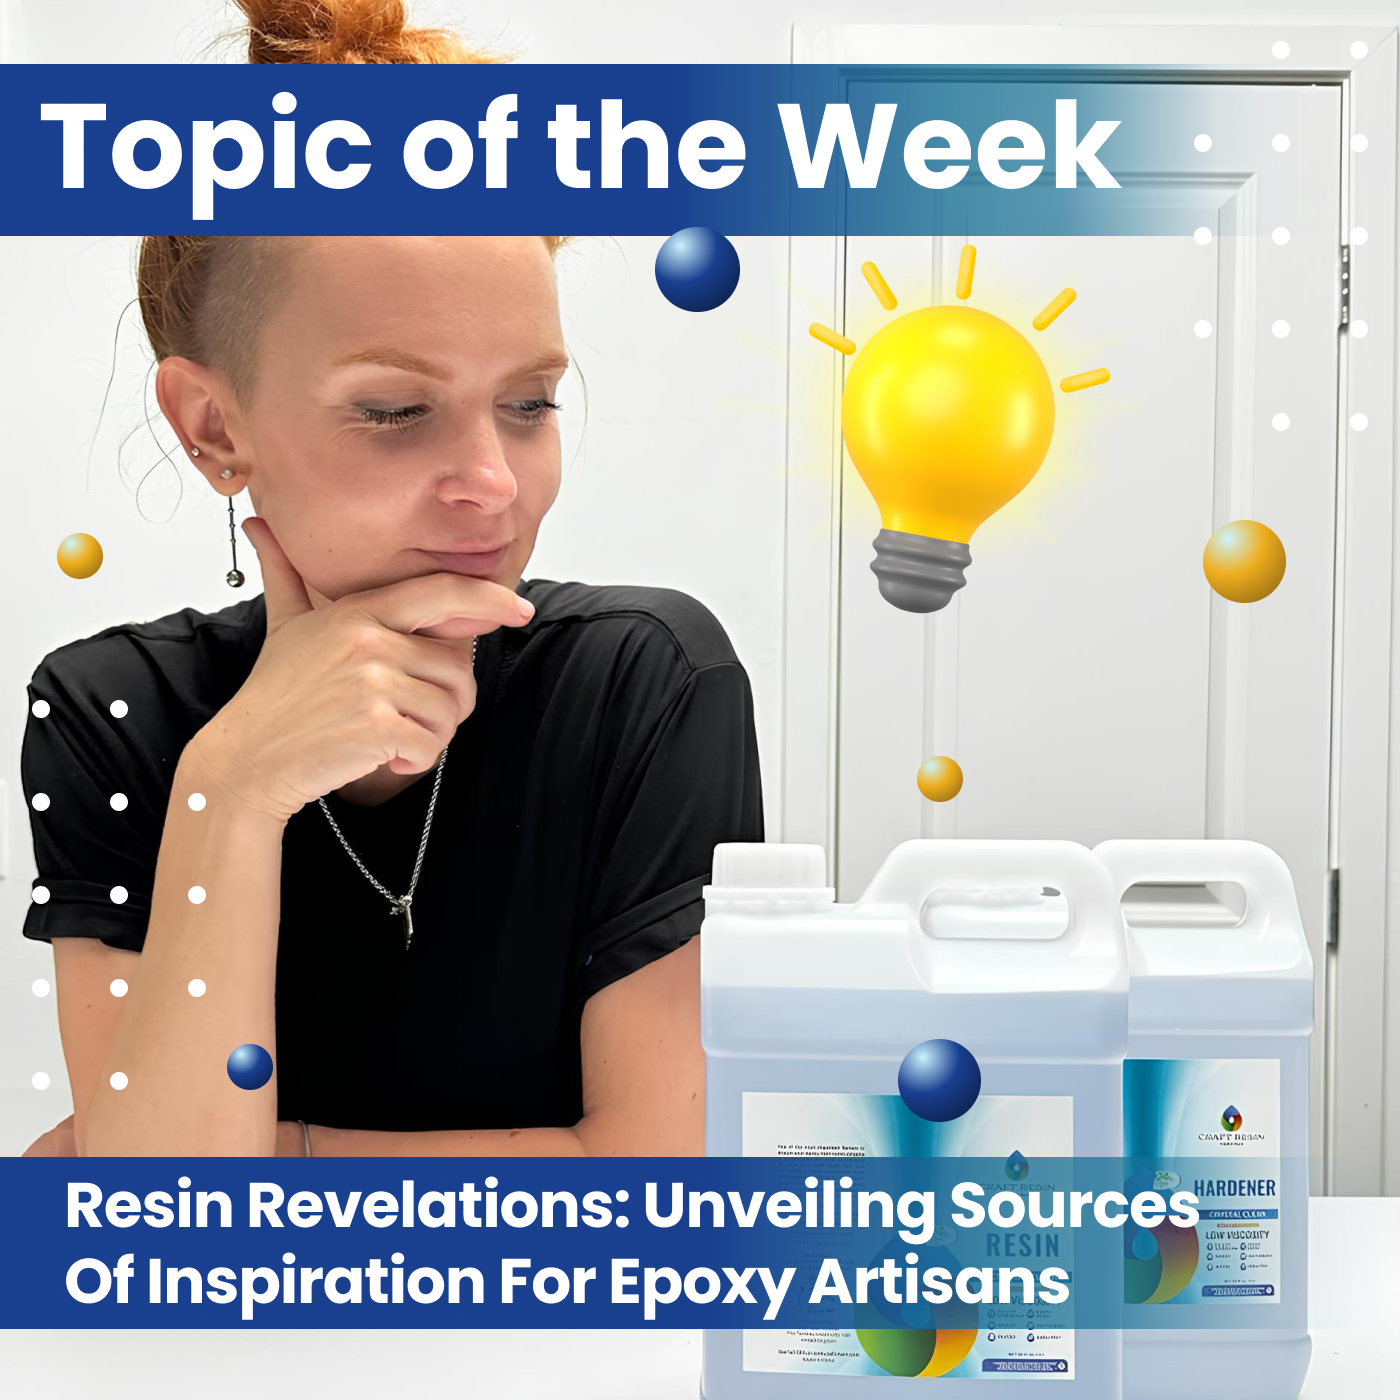 Resin Revelations: Unveiling Sources of Inspiration for Epoxy Artisans